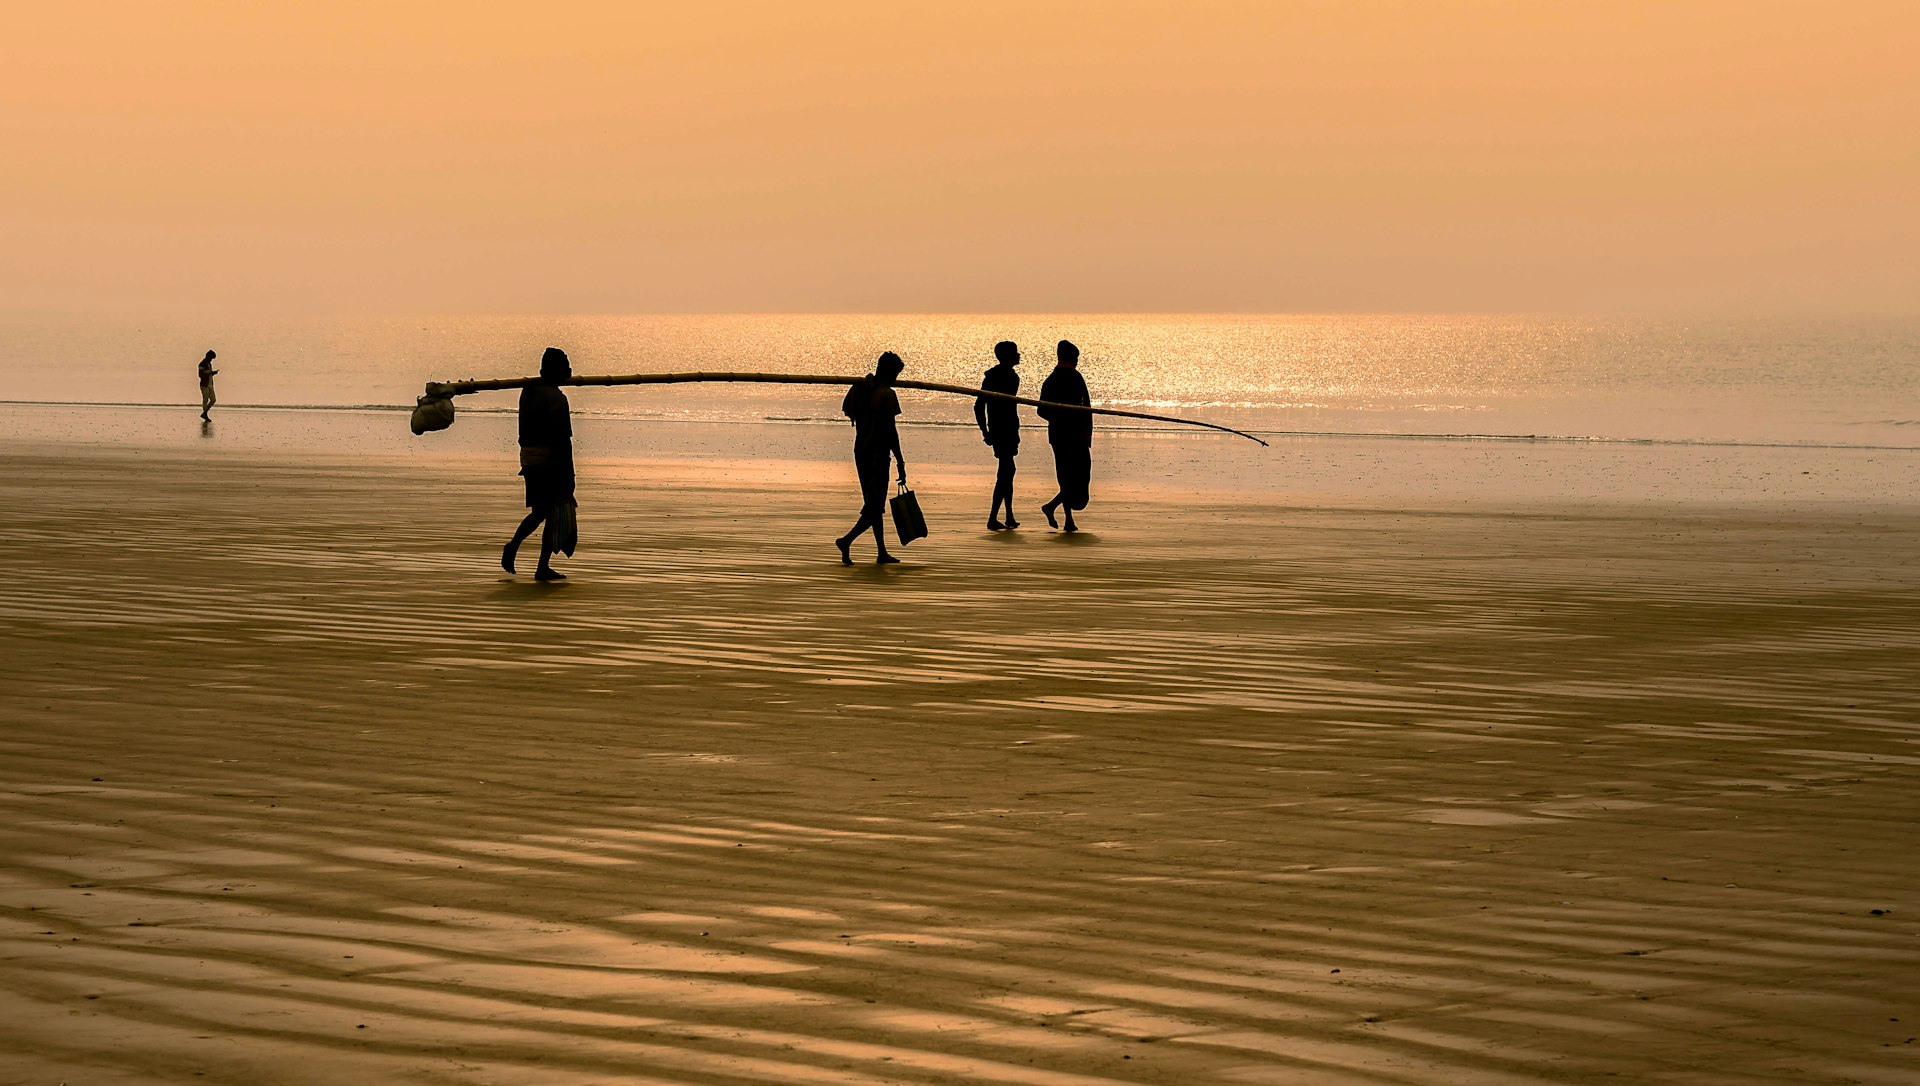 Silhouette of people walking on the beach at dusk